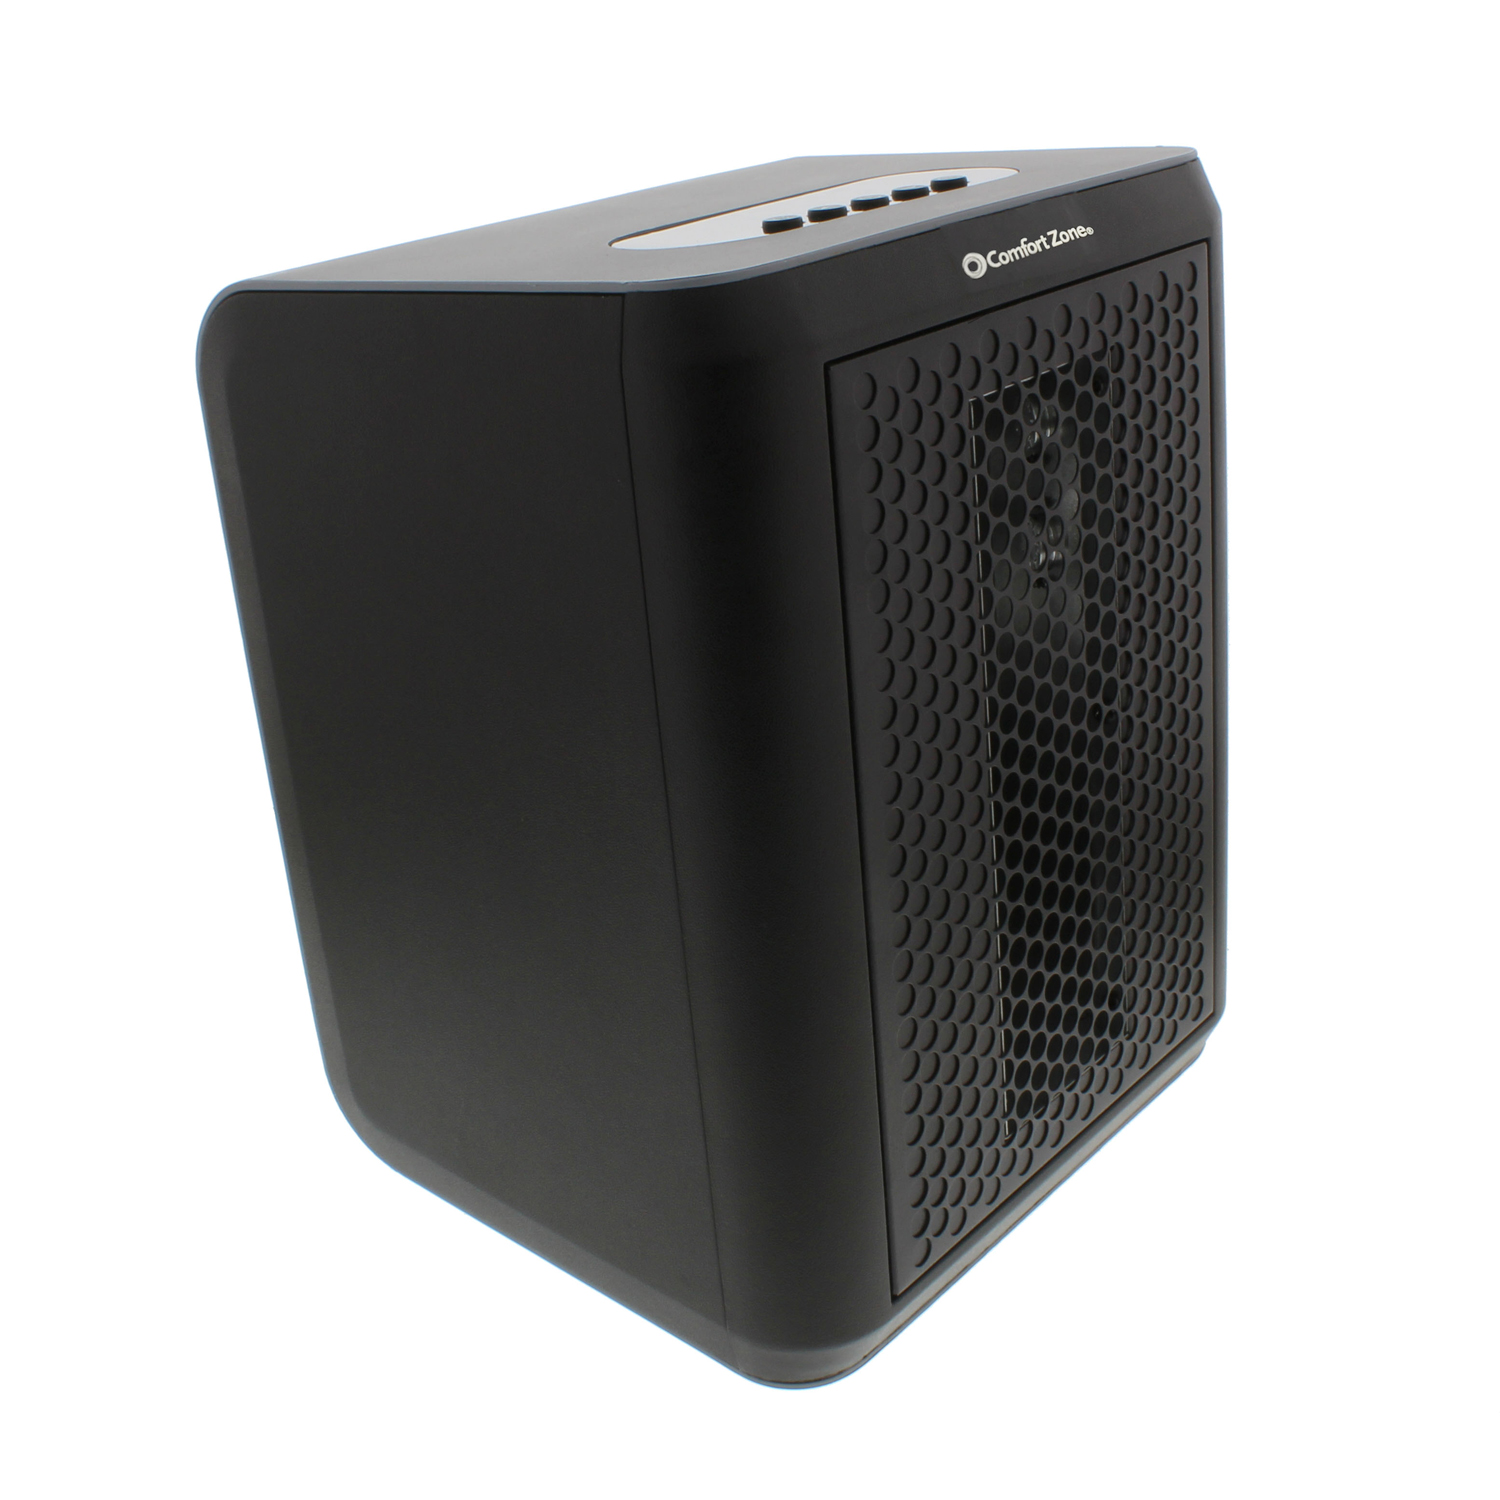 Comfort Zone Infrared Electric Portable Desktop Space Heater, Black - image 3 of 4